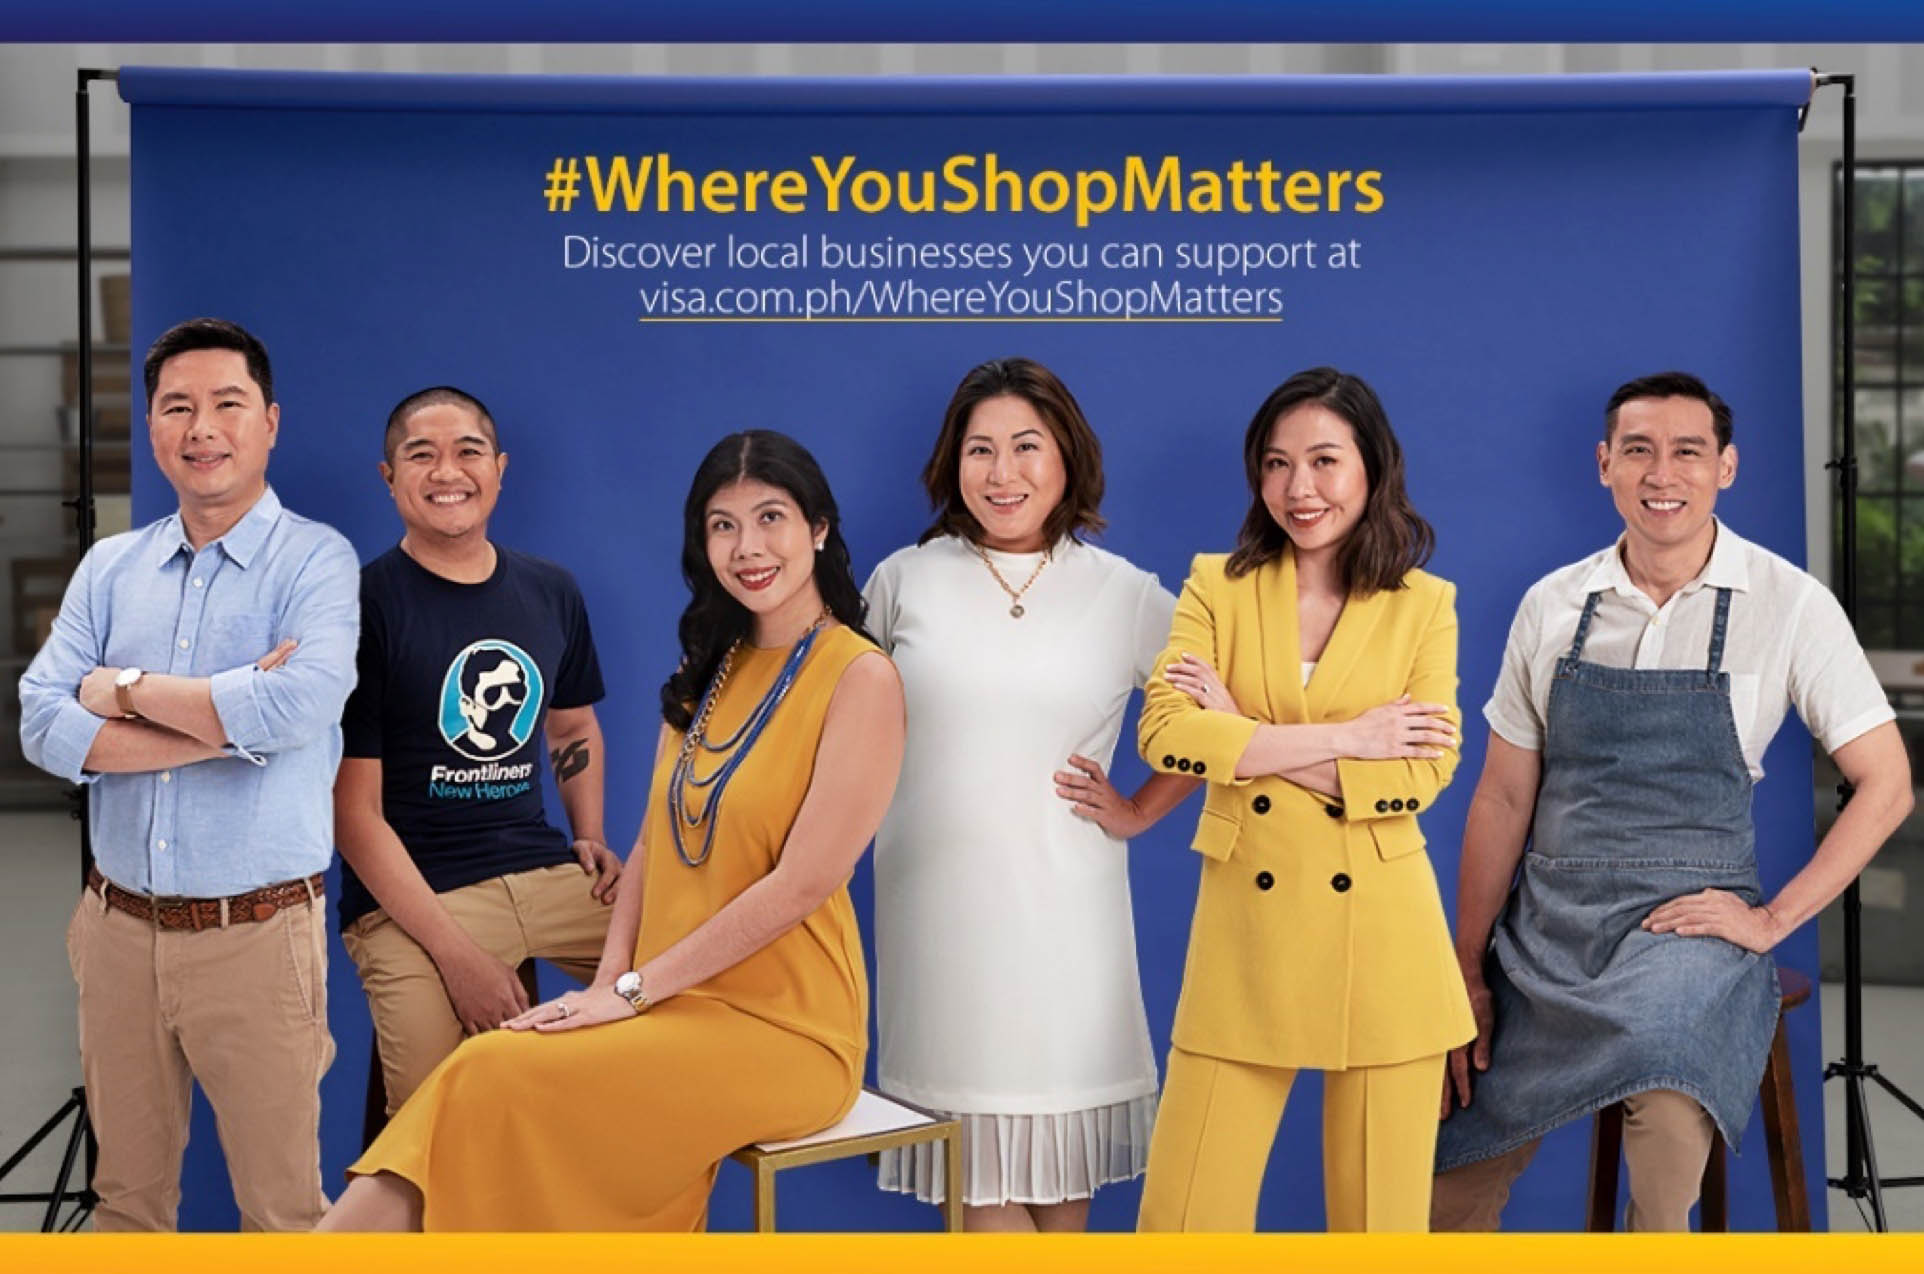 Visa and Shopee launches #WhereYouShopMatters campaign to support local businesses to go digital